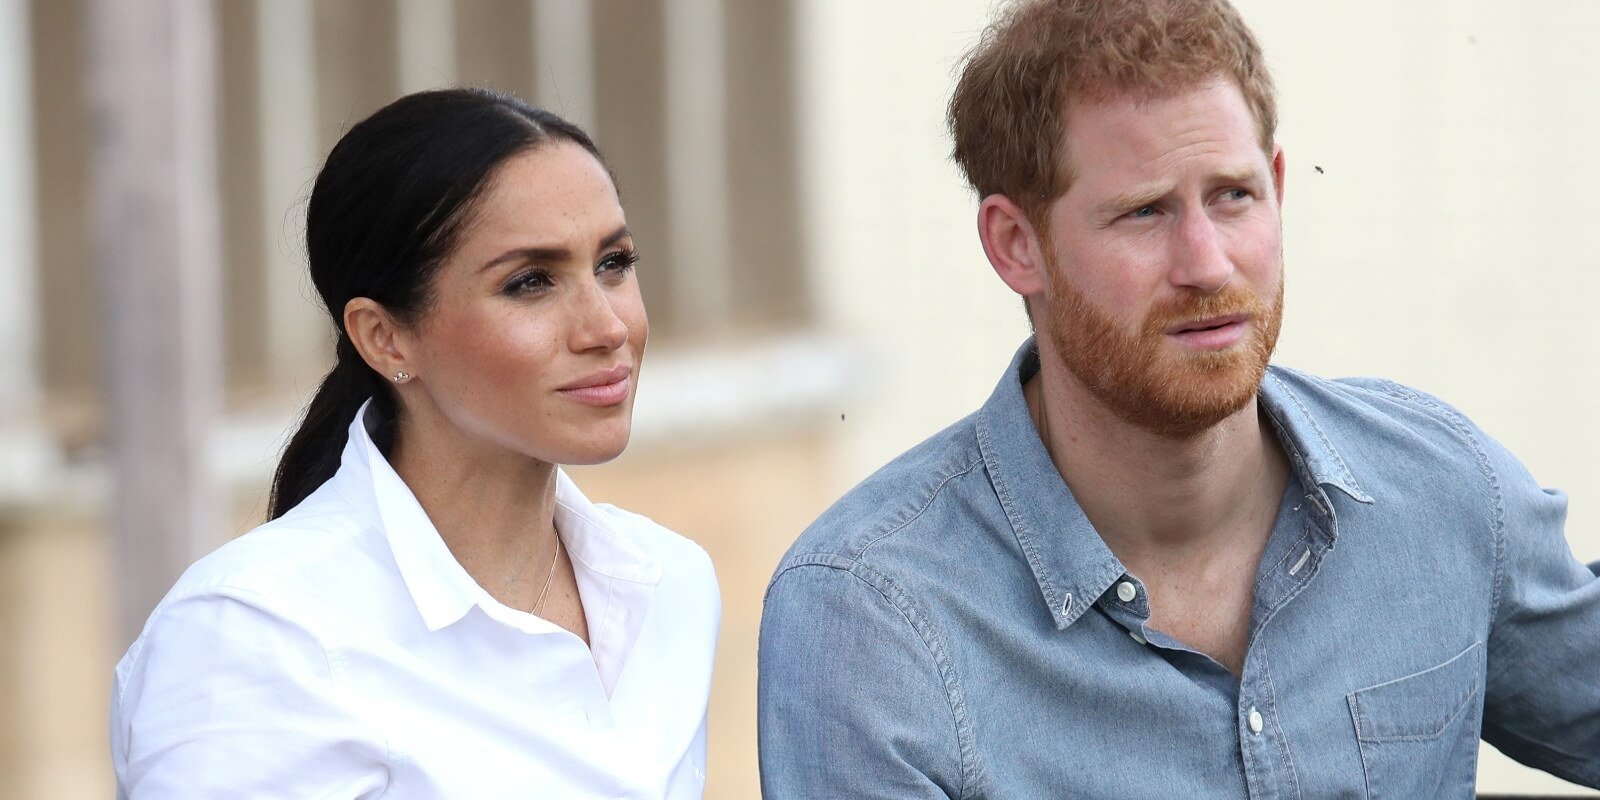 Prince Harry and Meghan Markle’s Royal Titles the ‘Only Currency’ They Have Left, Claims Writer